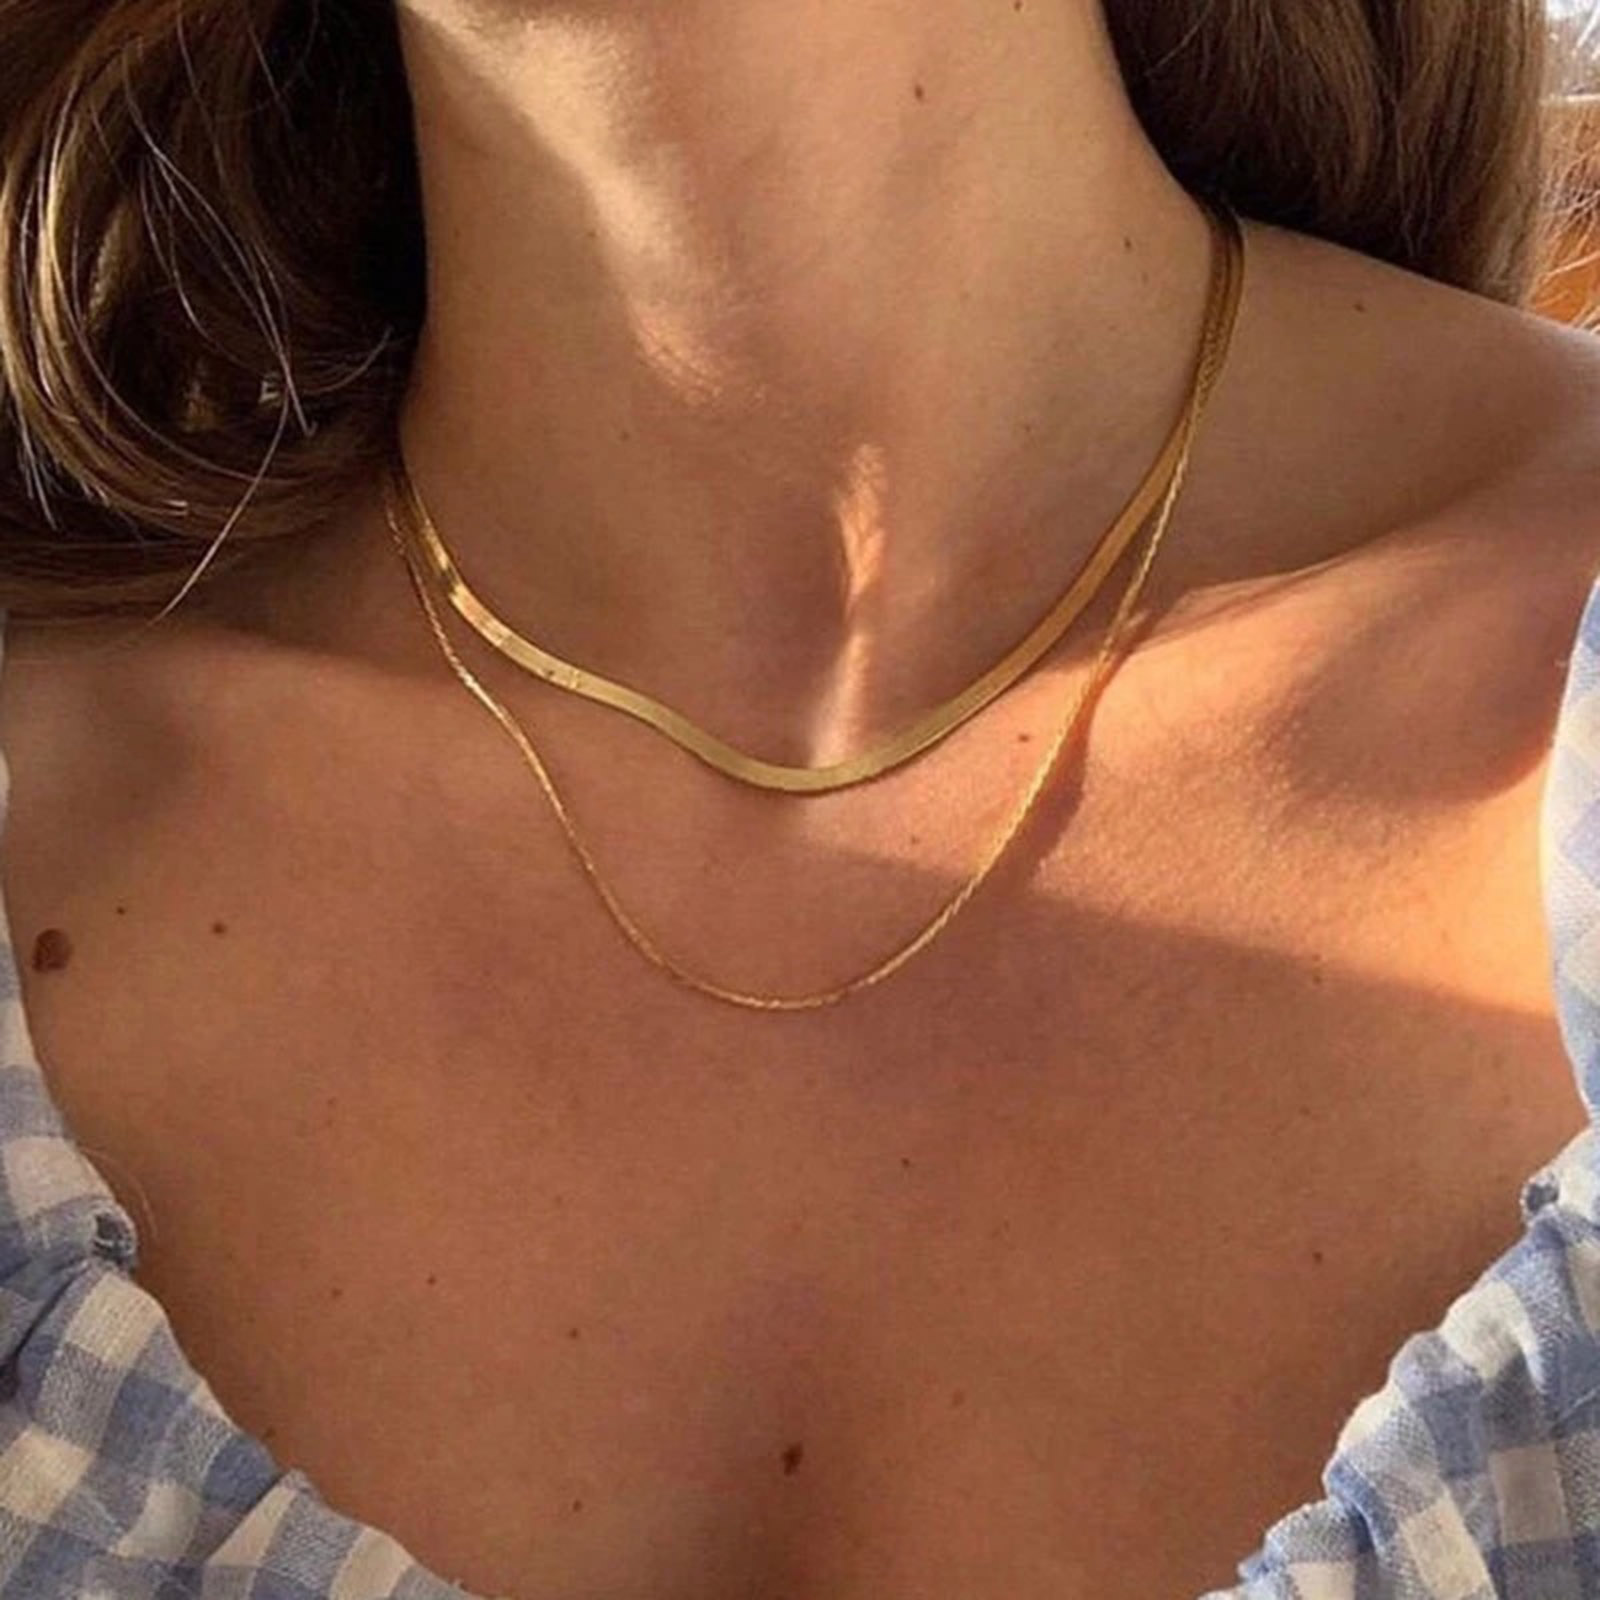 Picture of Eco-friendly Simple & Casual Exquisite 18K Real Gold Plated 304 Stainless Steel Link Chain Necklace Unisex